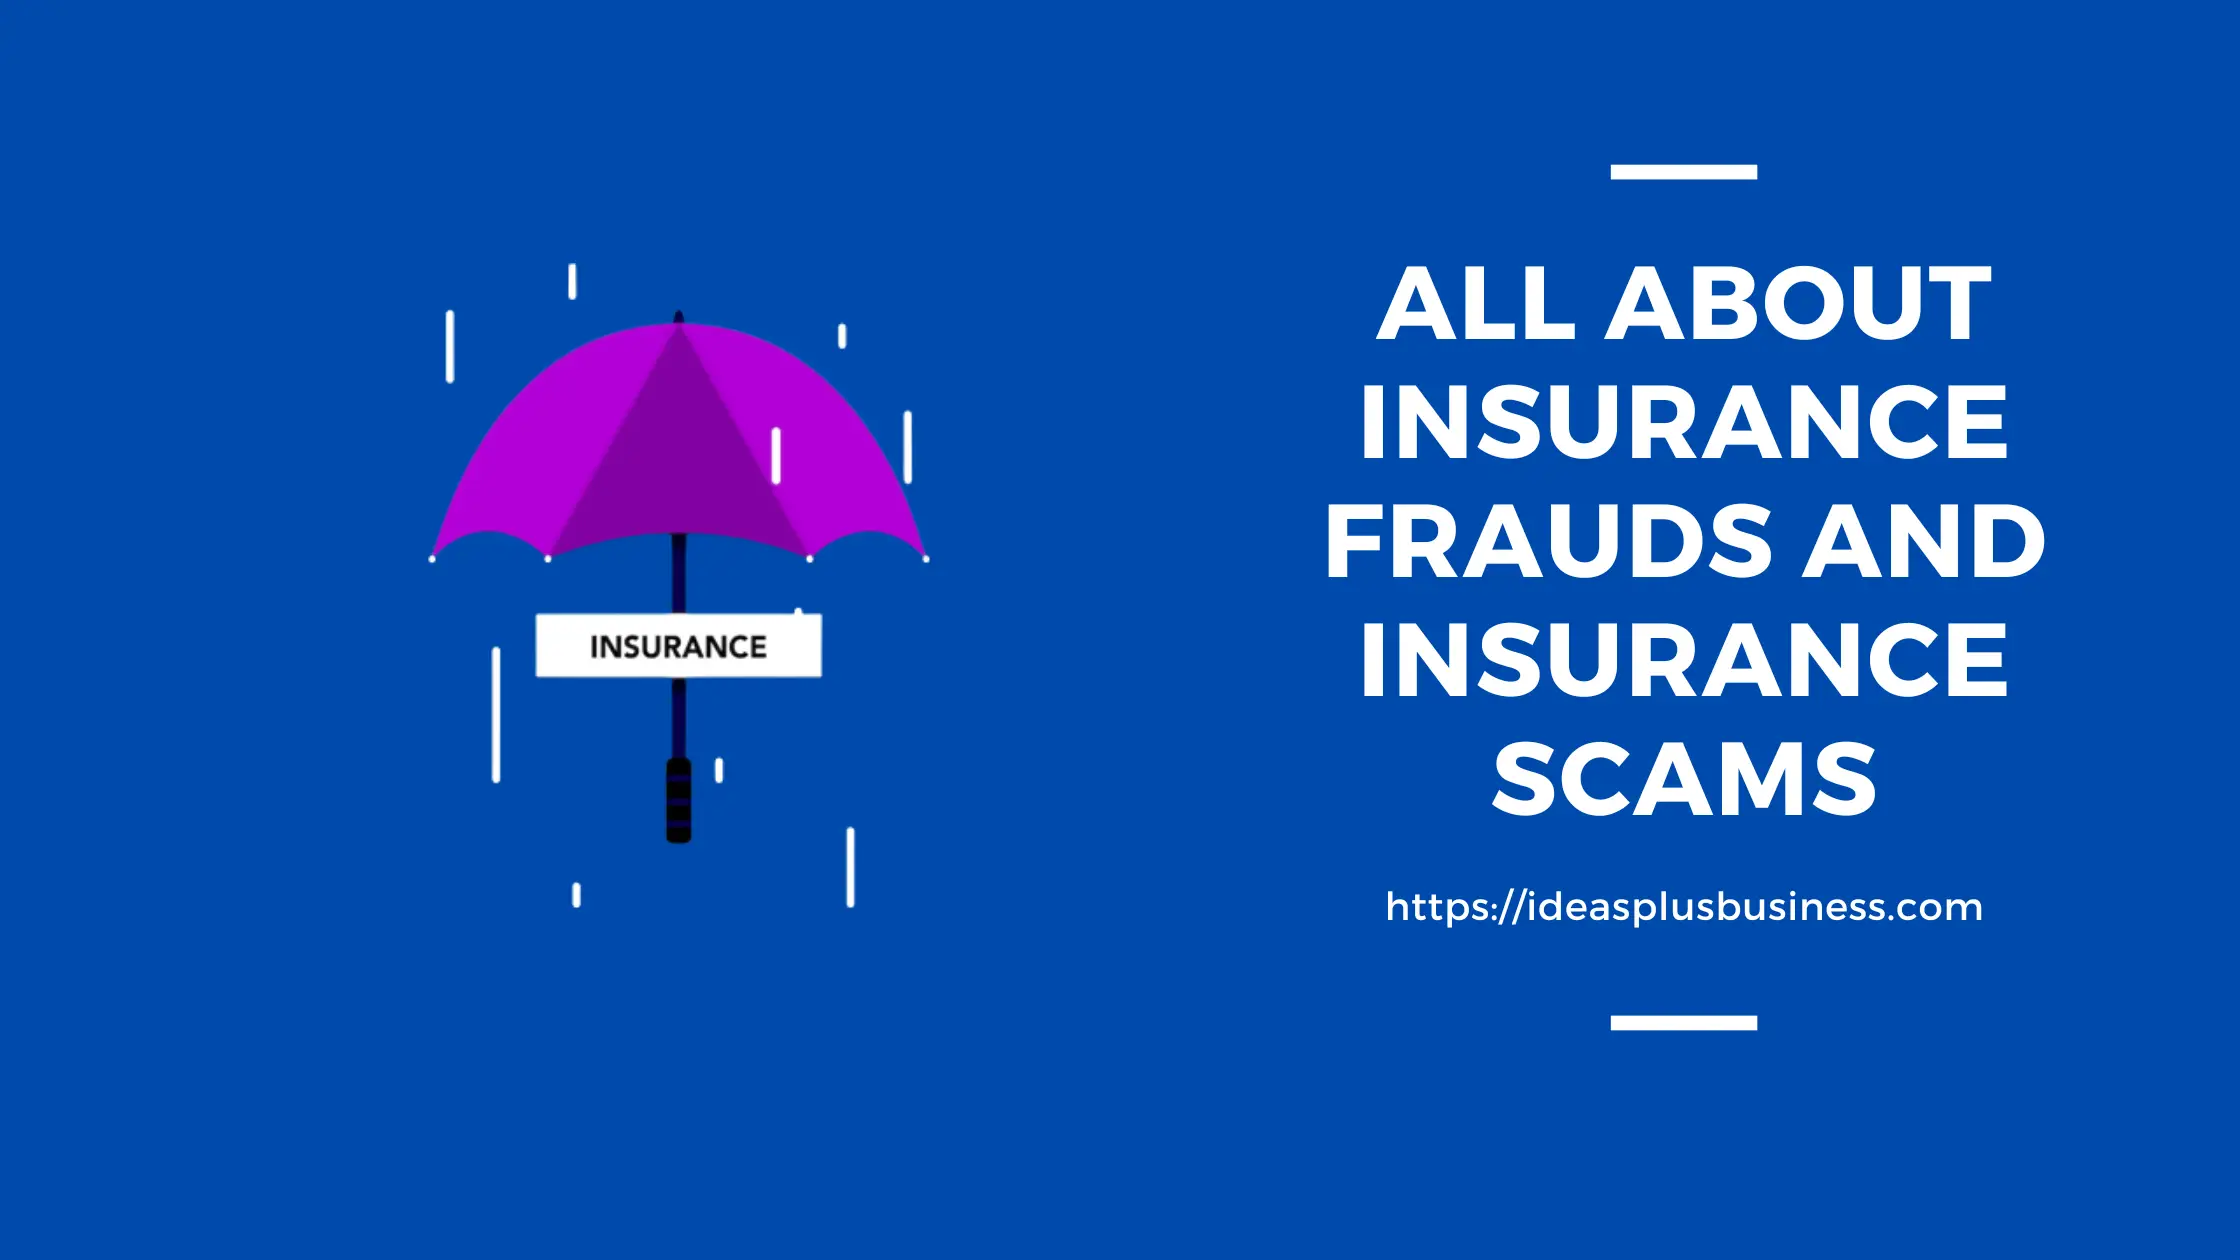 Everything You Need to Know About Insurance Frauds